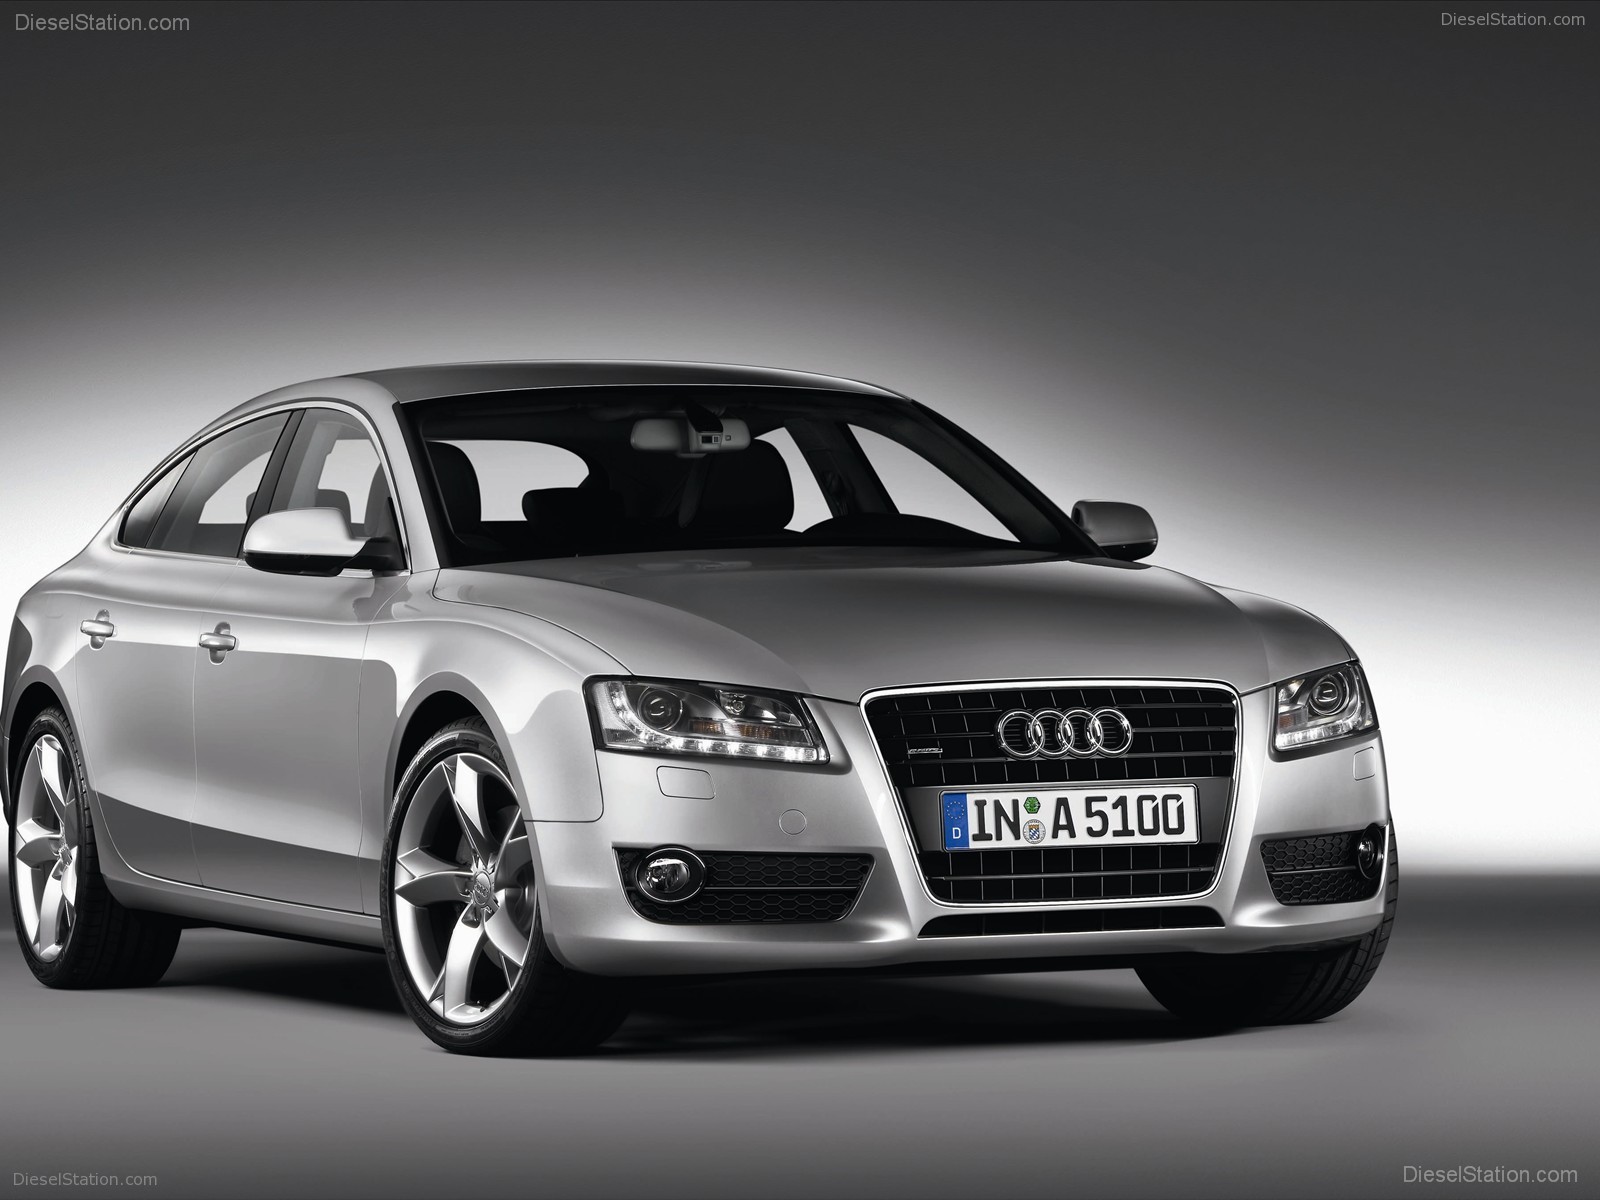 Audi 2010 works on the new level with the E-tron model #1